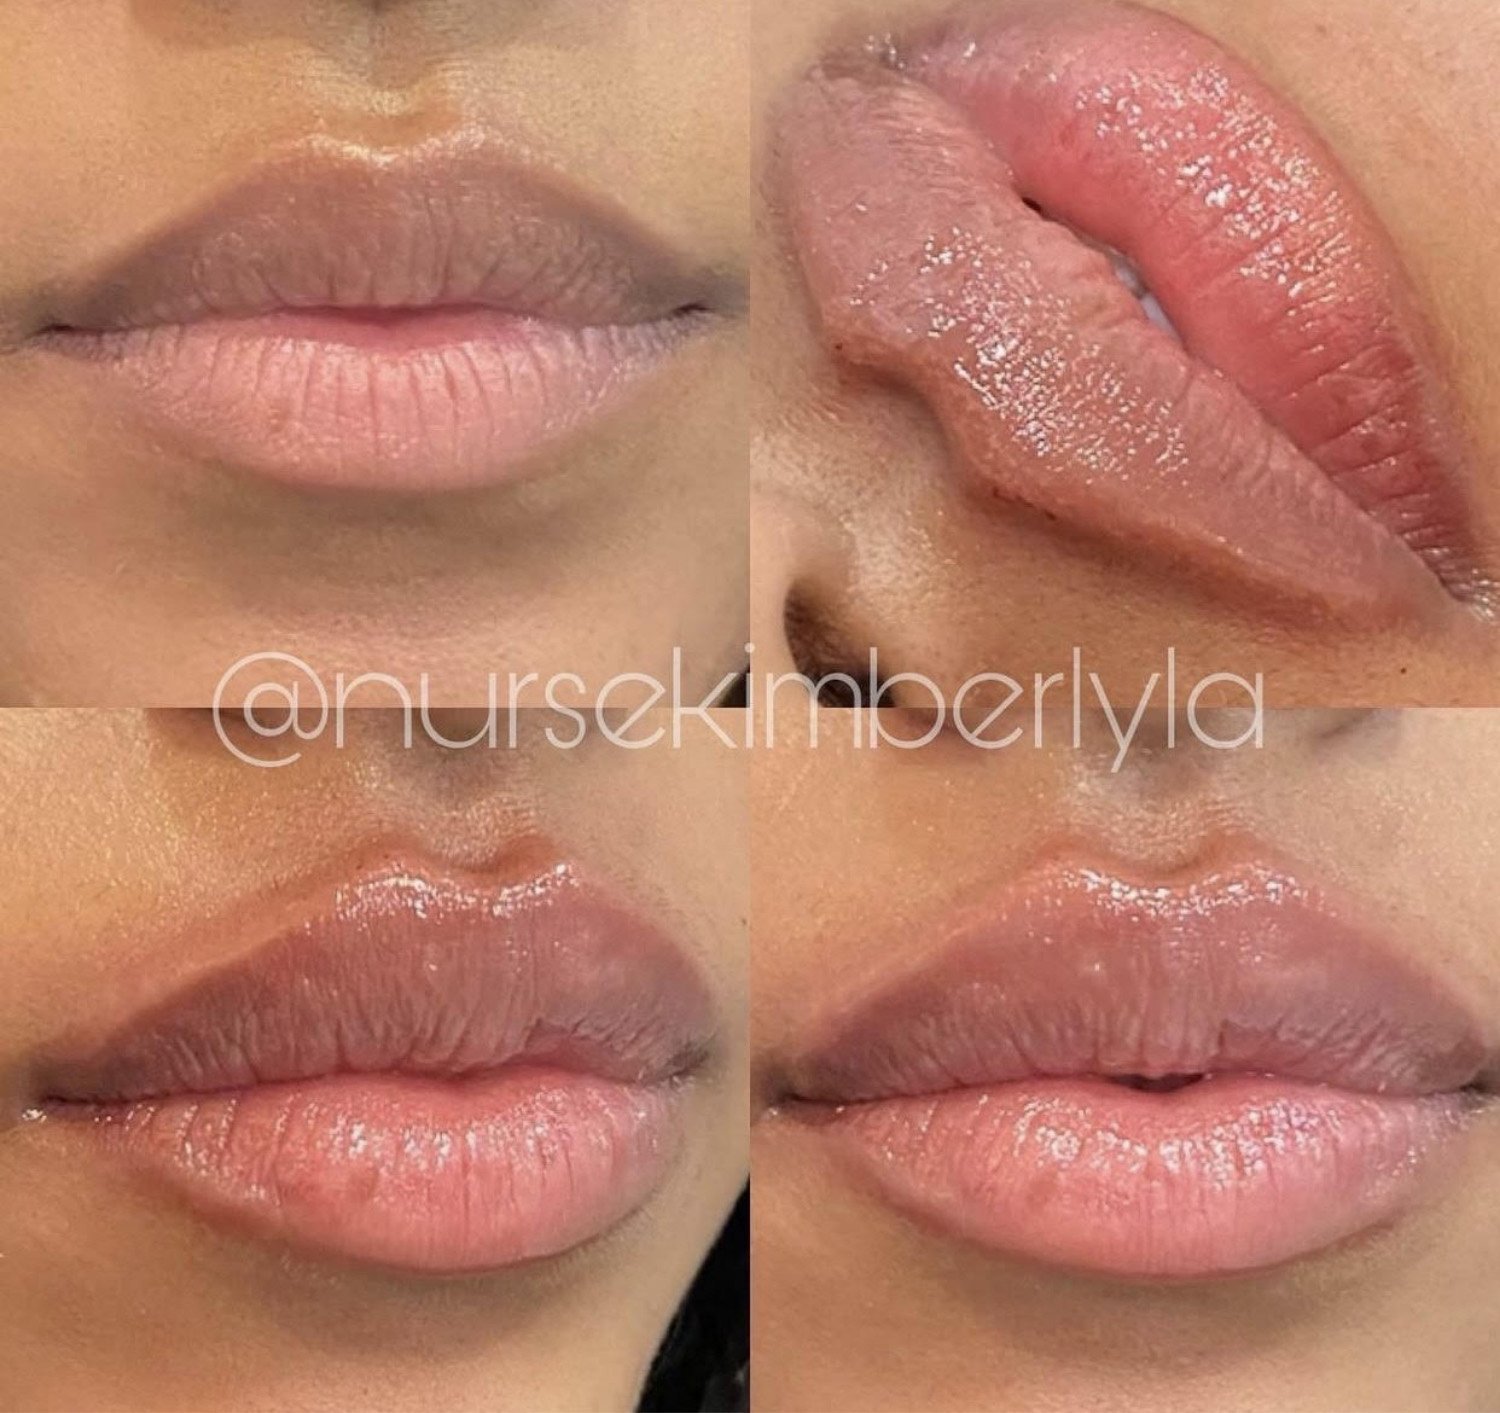 Kimberly cosmetic lip botox injection before and after.jpg